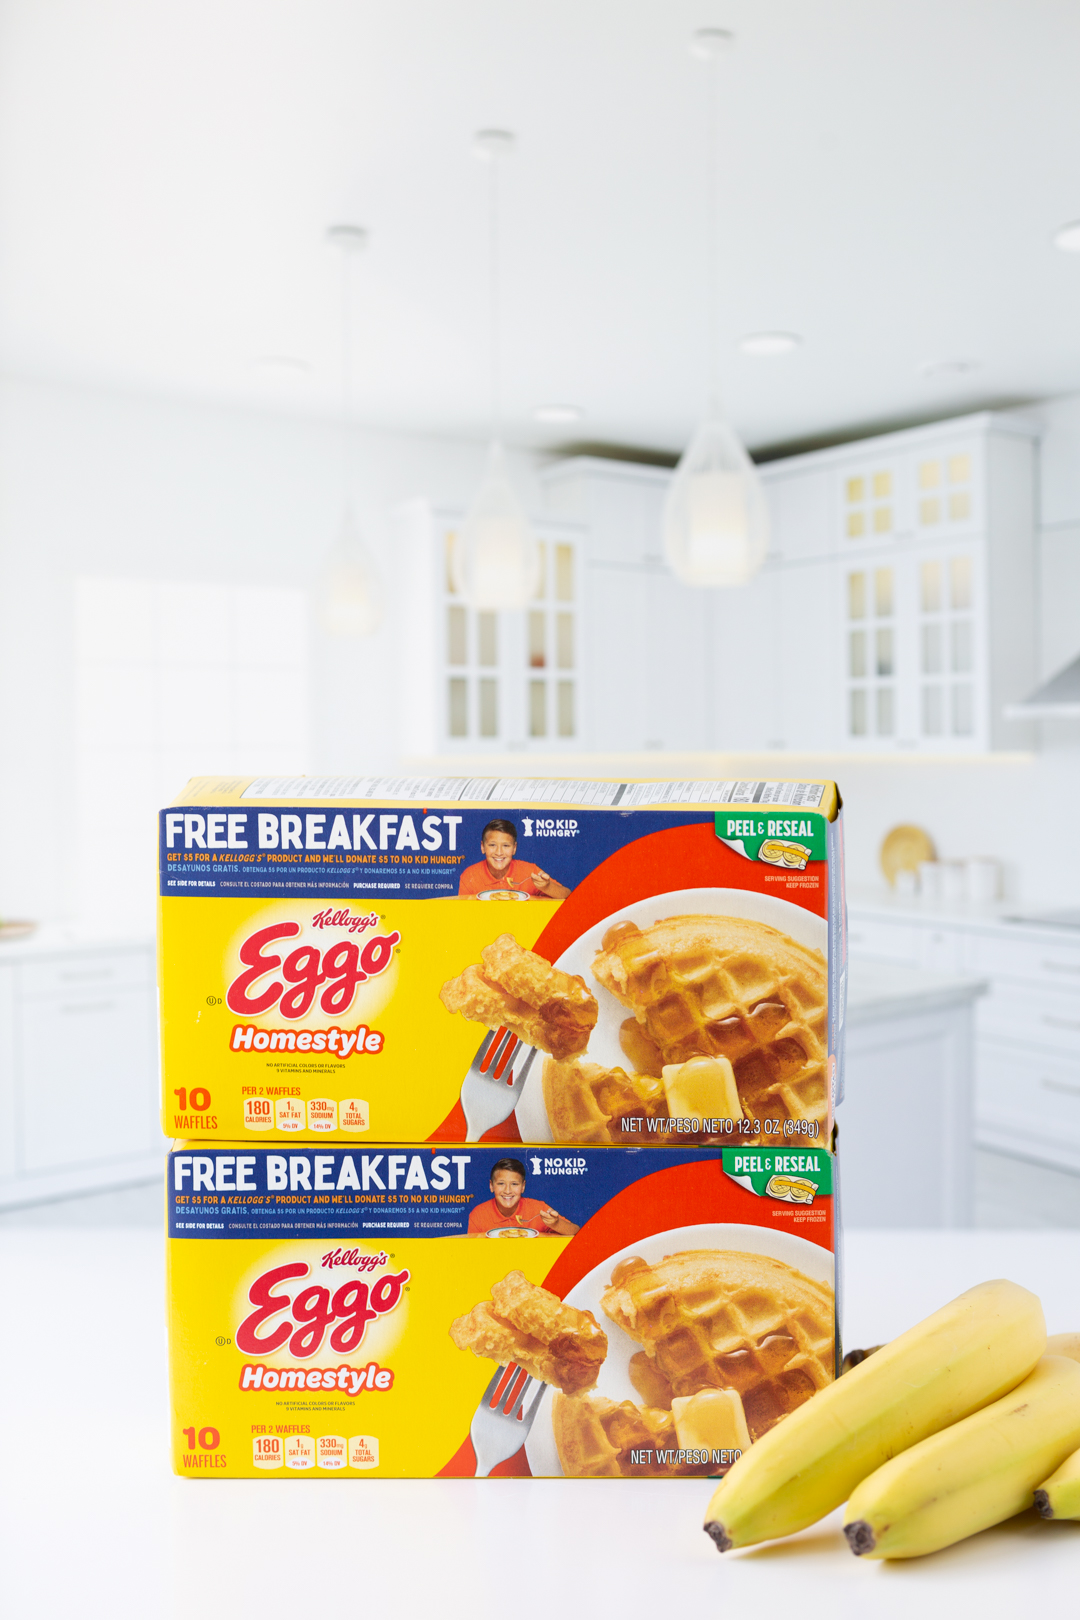 eggo homestyle waffle packages next to banana